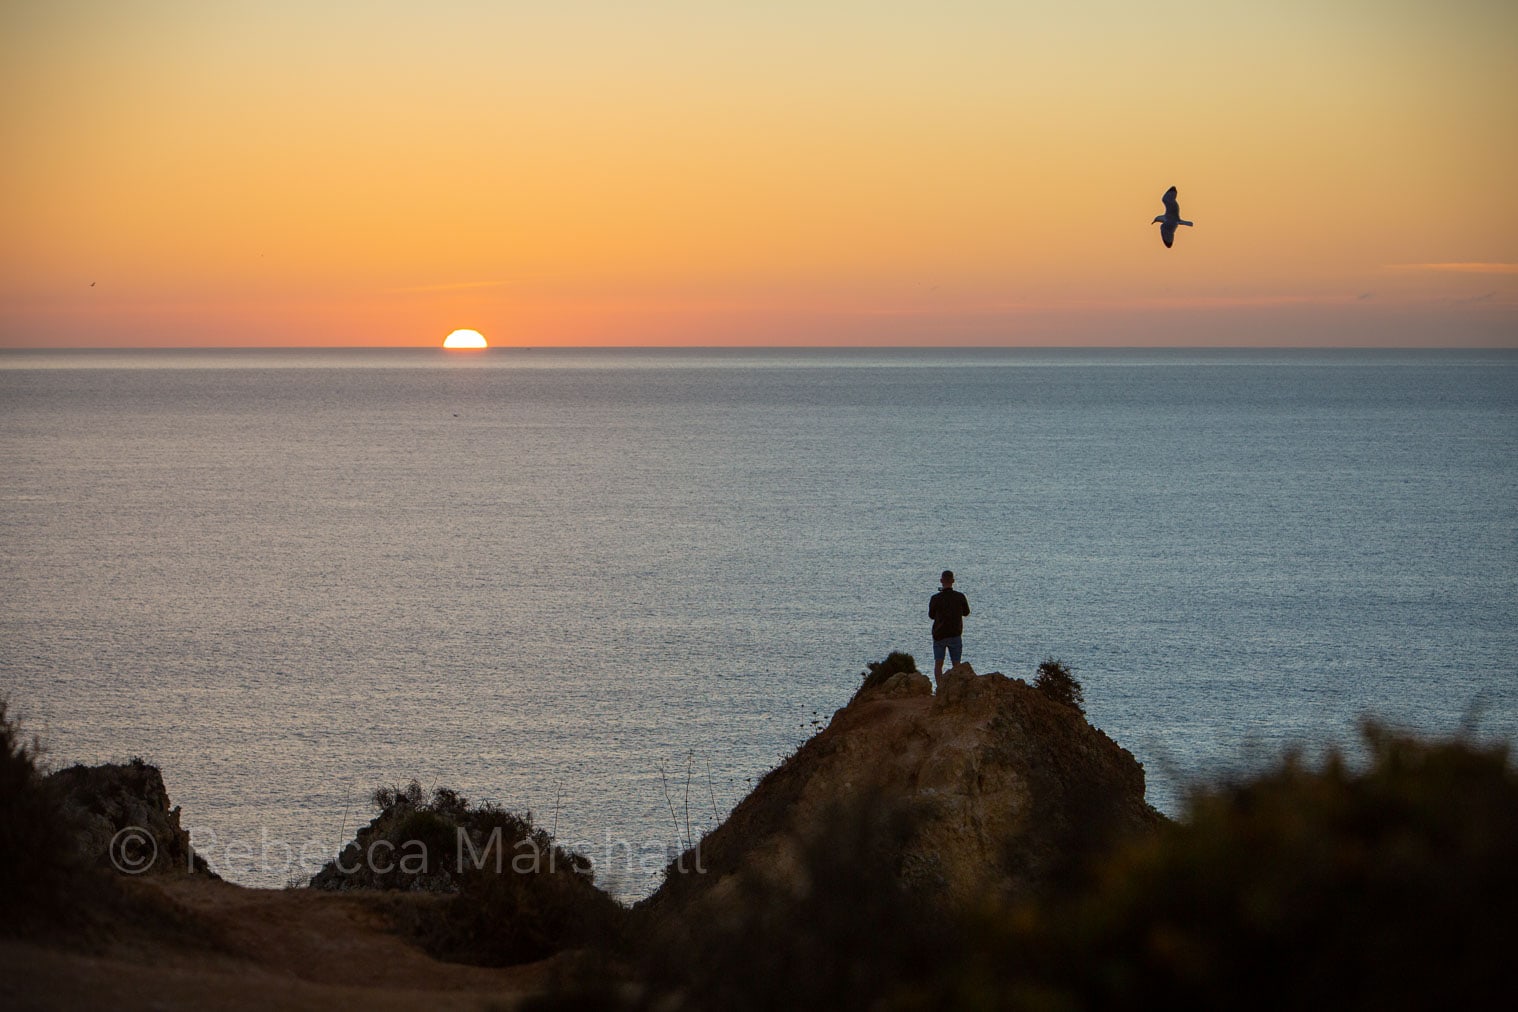 Photograph of the silhouette of a man standing on a dune watching the sunrise